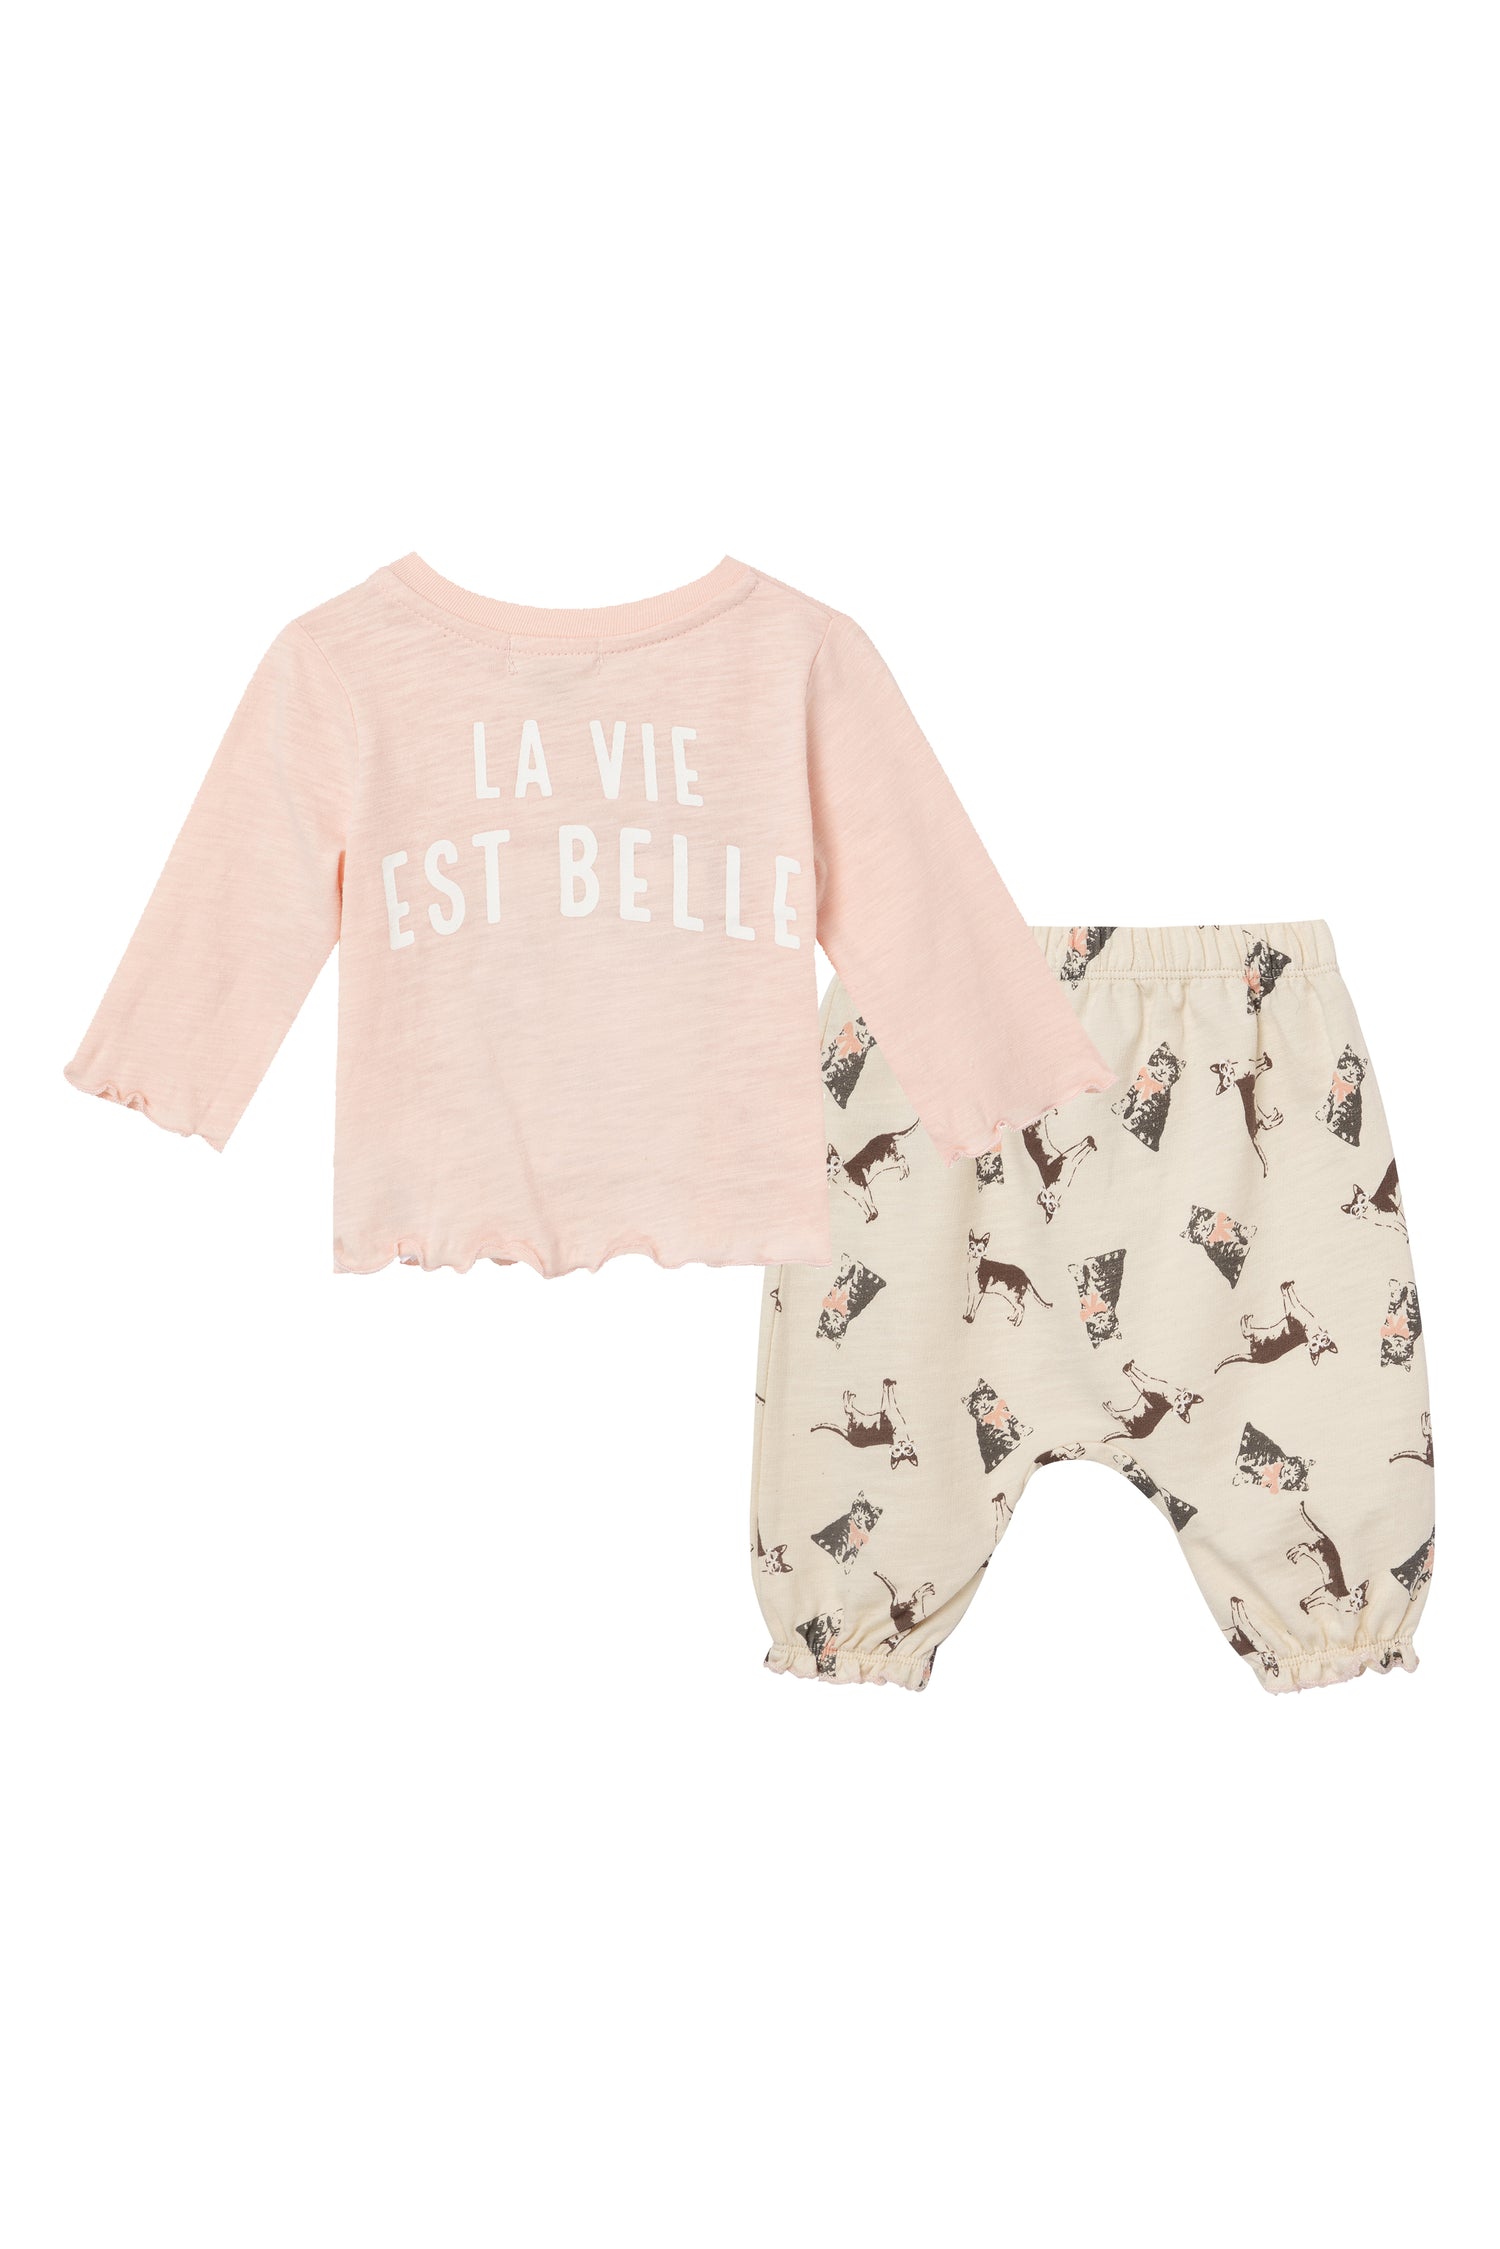 Front view of pink shirt and tan pant set with French cat image and "La vie est belle"